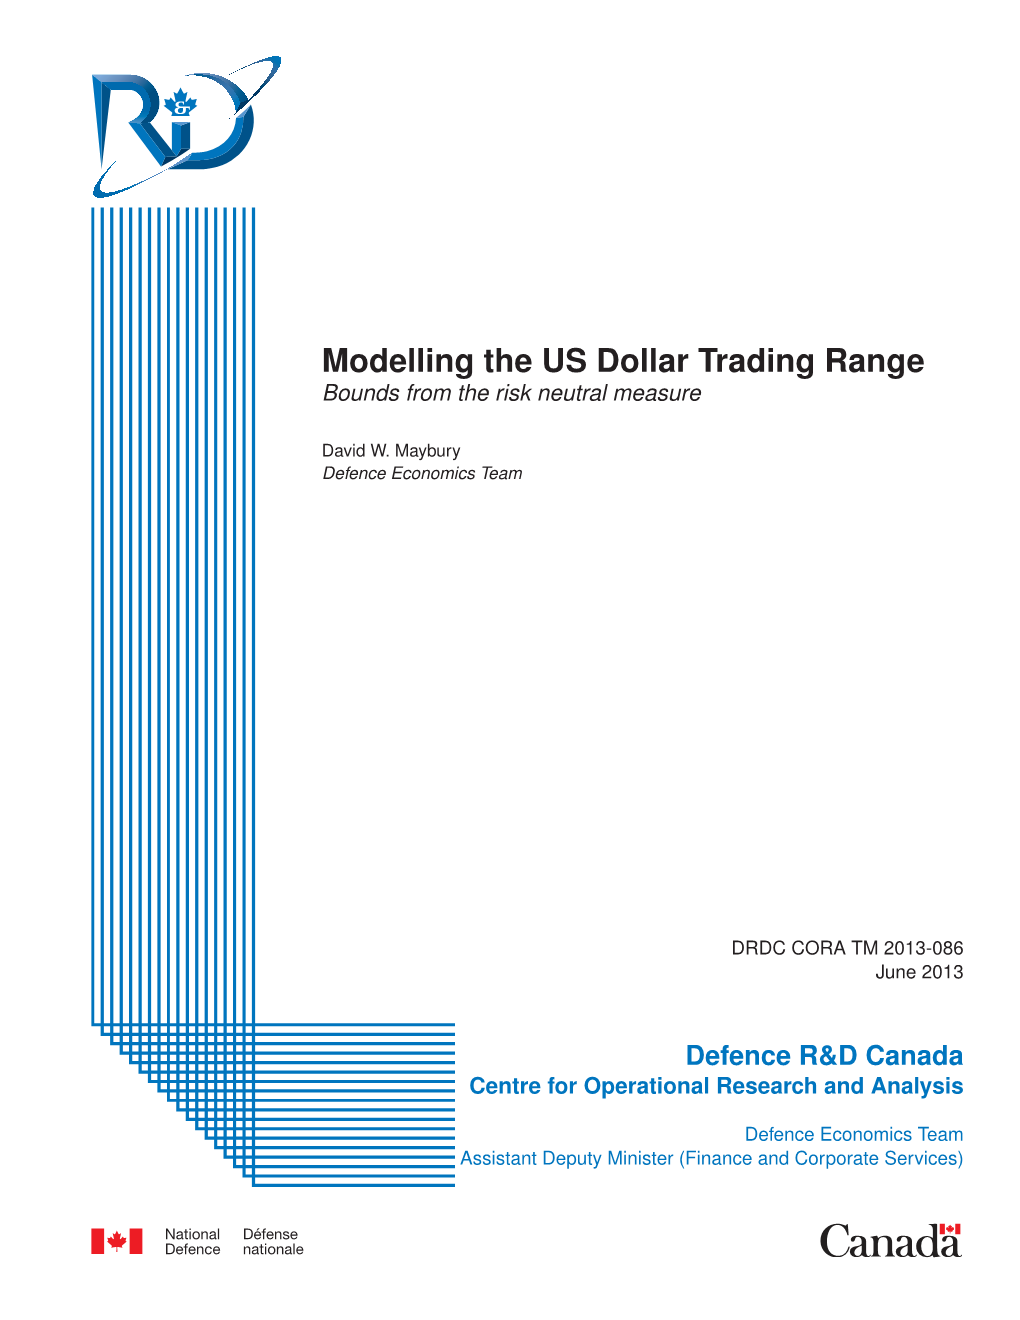 Modelling the US Dollar Trading Range Bounds from the Risk Neutral Measure